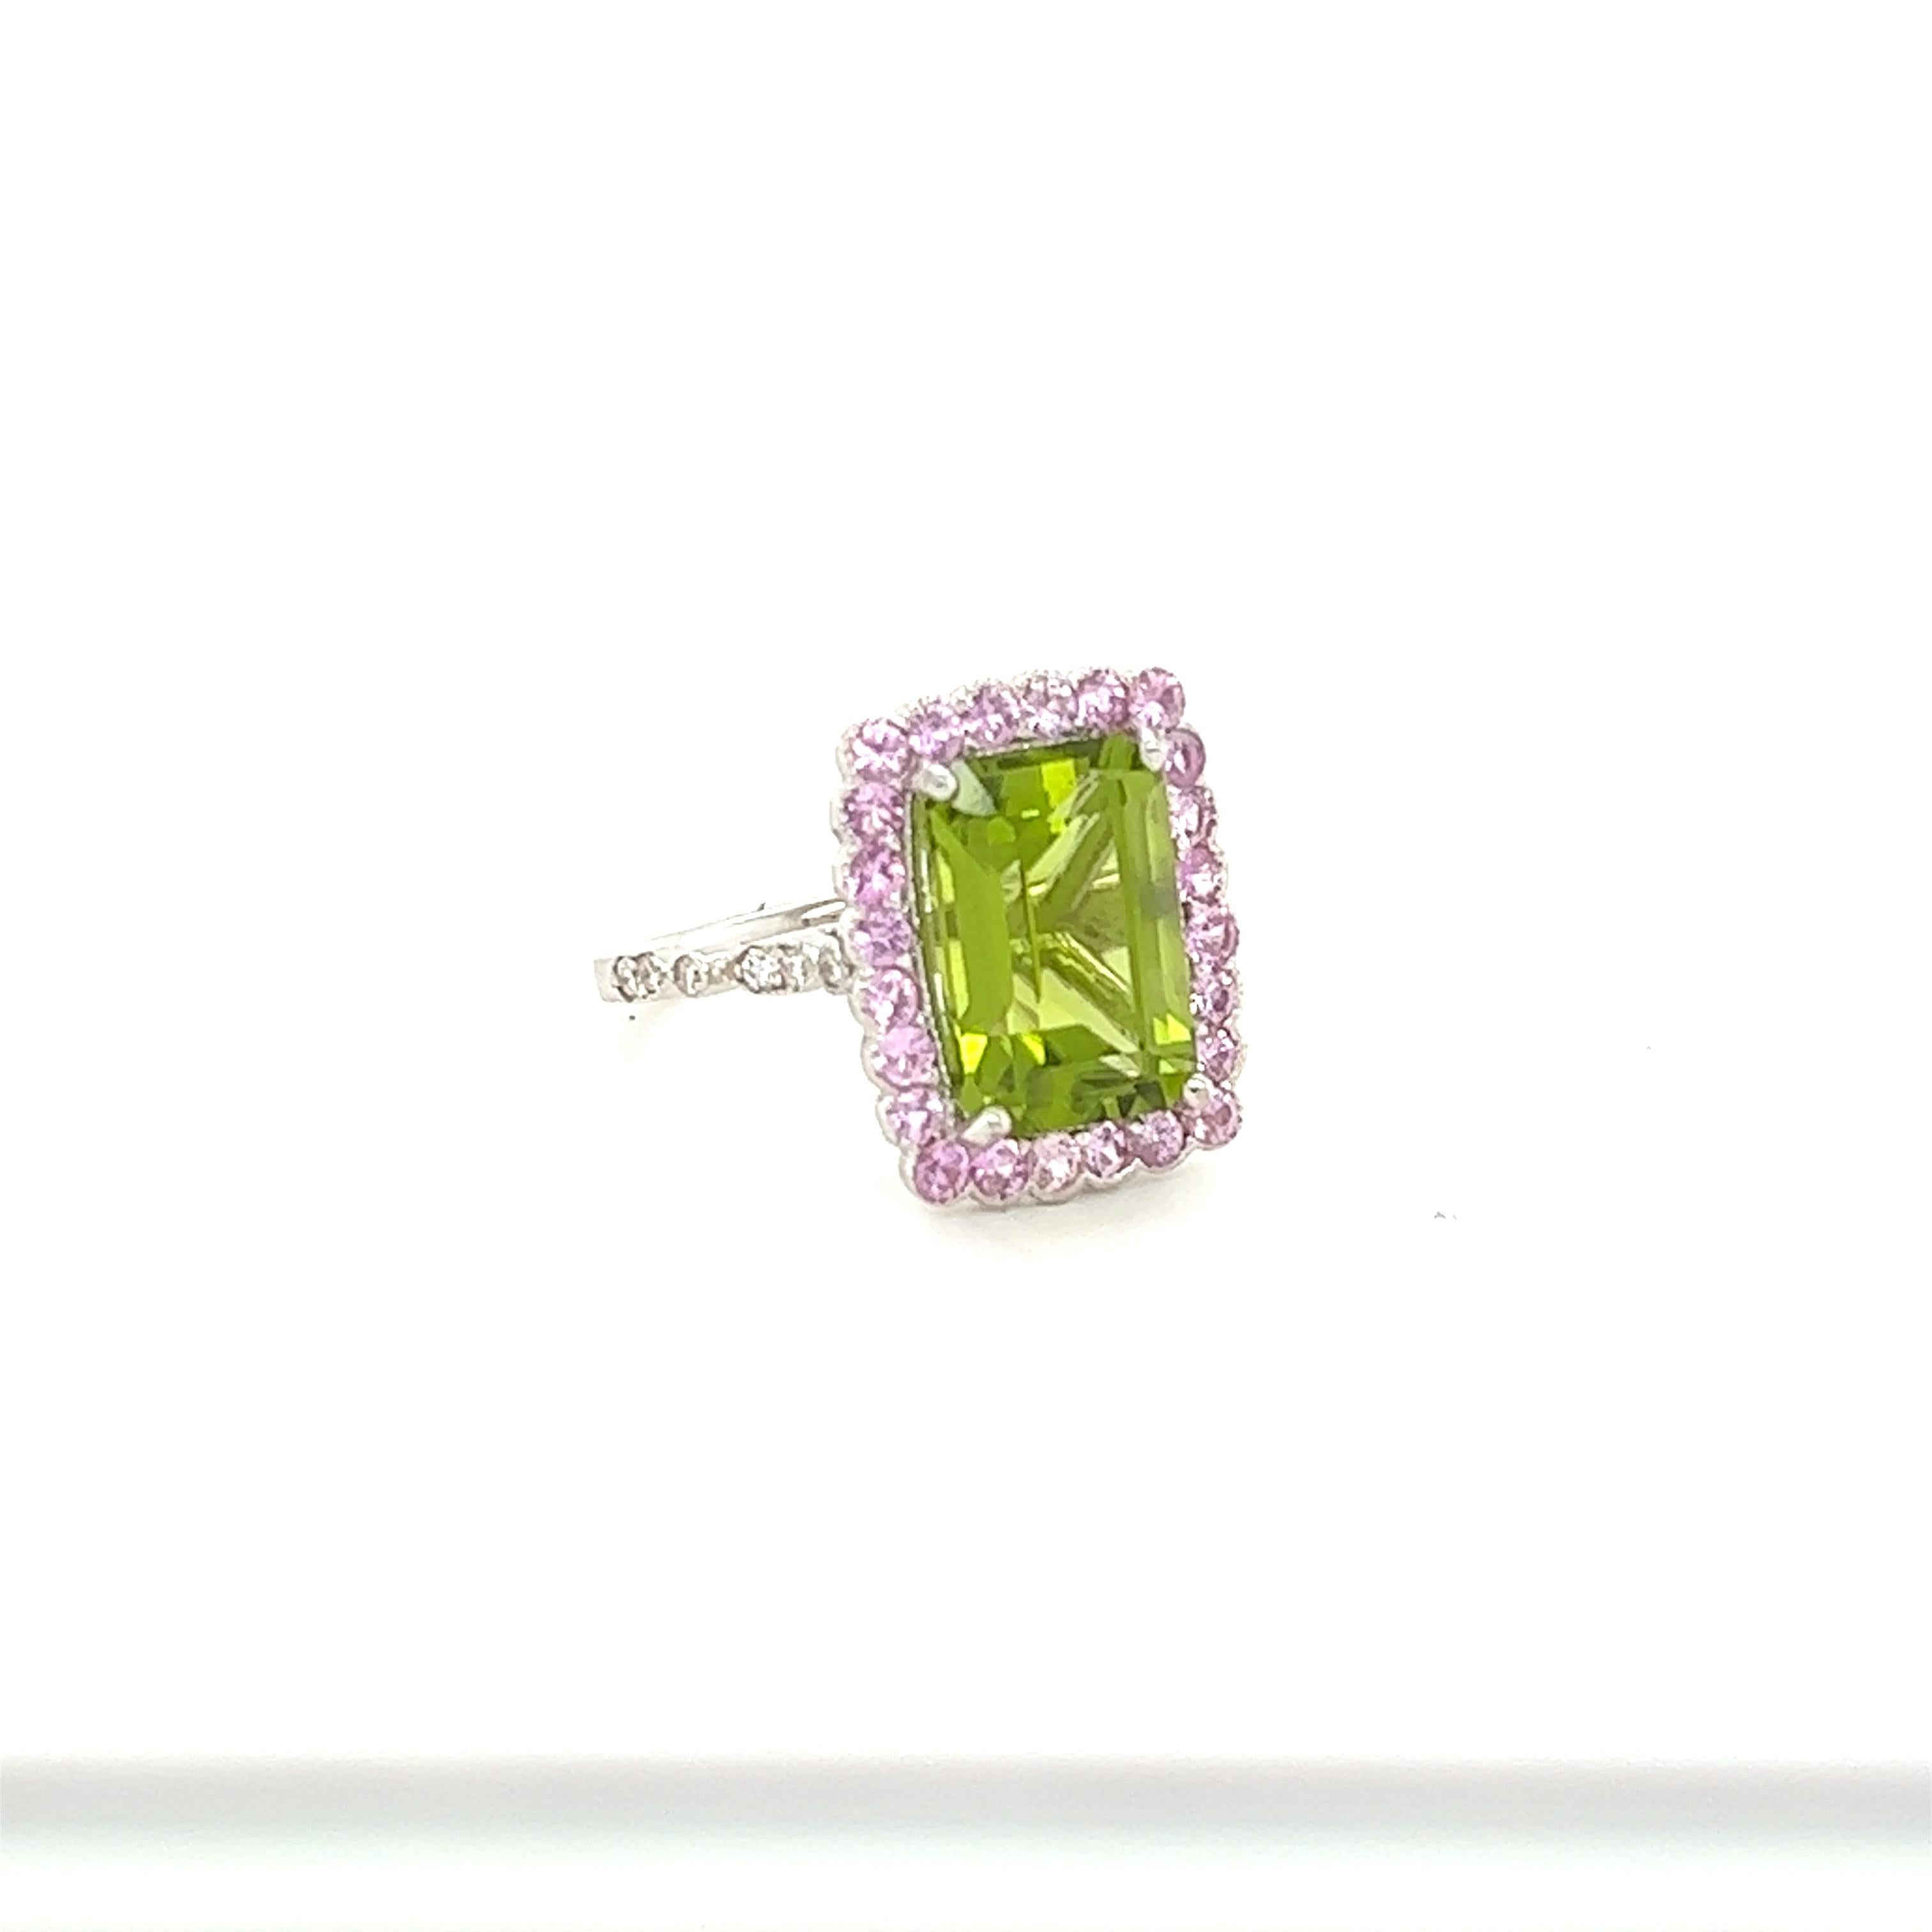 This ring has a 4.98 Carat Emerald Cut Peridot and 24 Pink Sapphires that weigh 0.86 Carats and 12 Round Cut Diamonds that weigh 0.14 carats (Clarity: VS, Color: H) The total carat weight of the ring is 5.98 Carats. The Peridot measures at 12 mm x 8